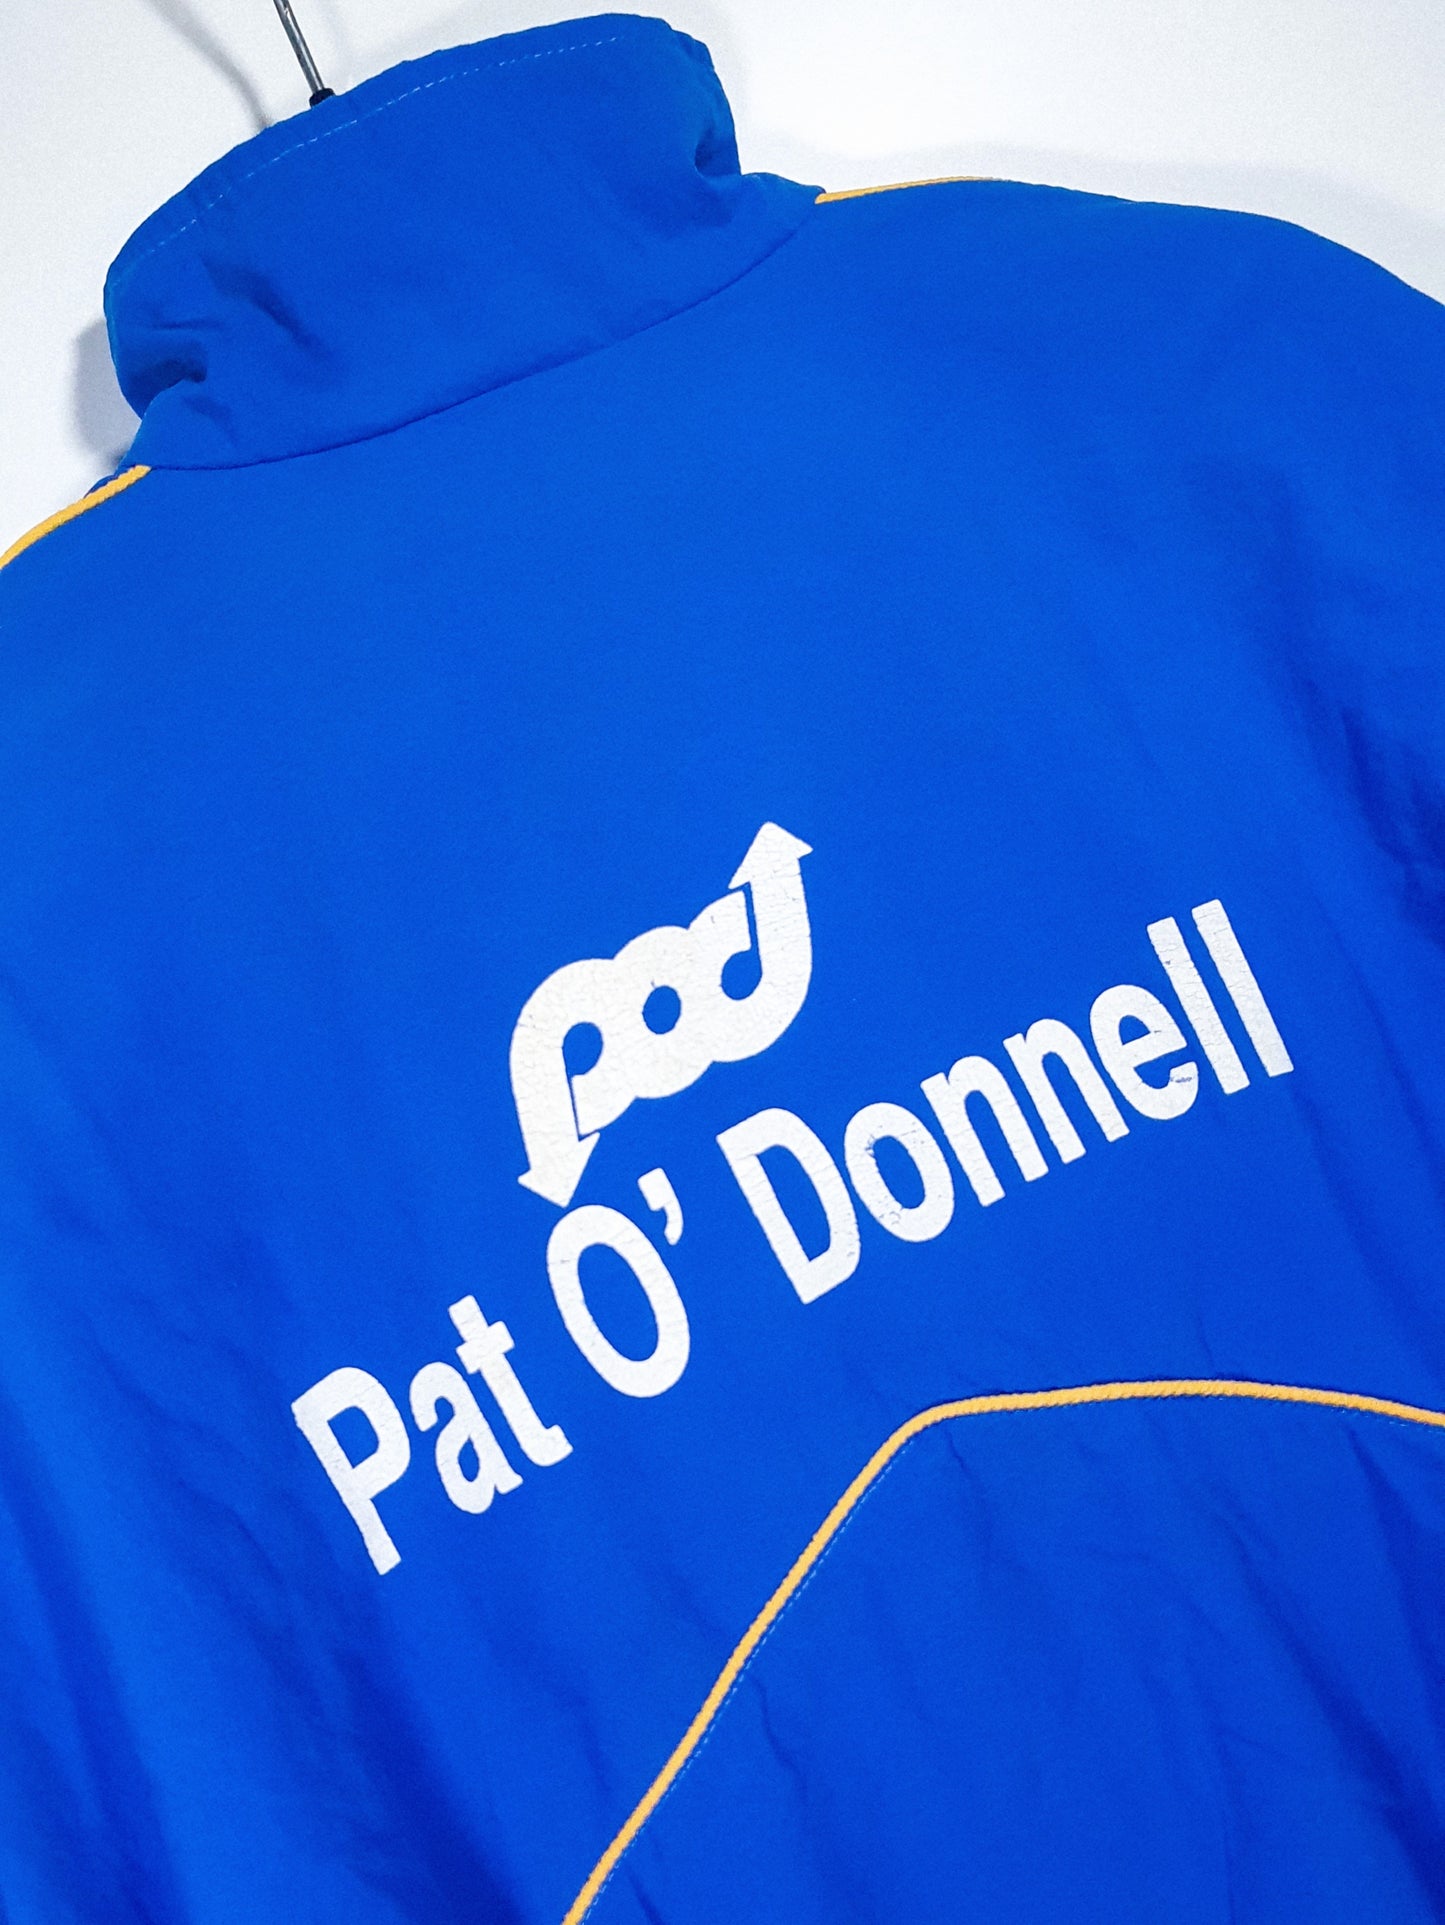 Clare Full Tracksuit 1995 All-Ireland Final (L) - Player Issue - Ollie Baker